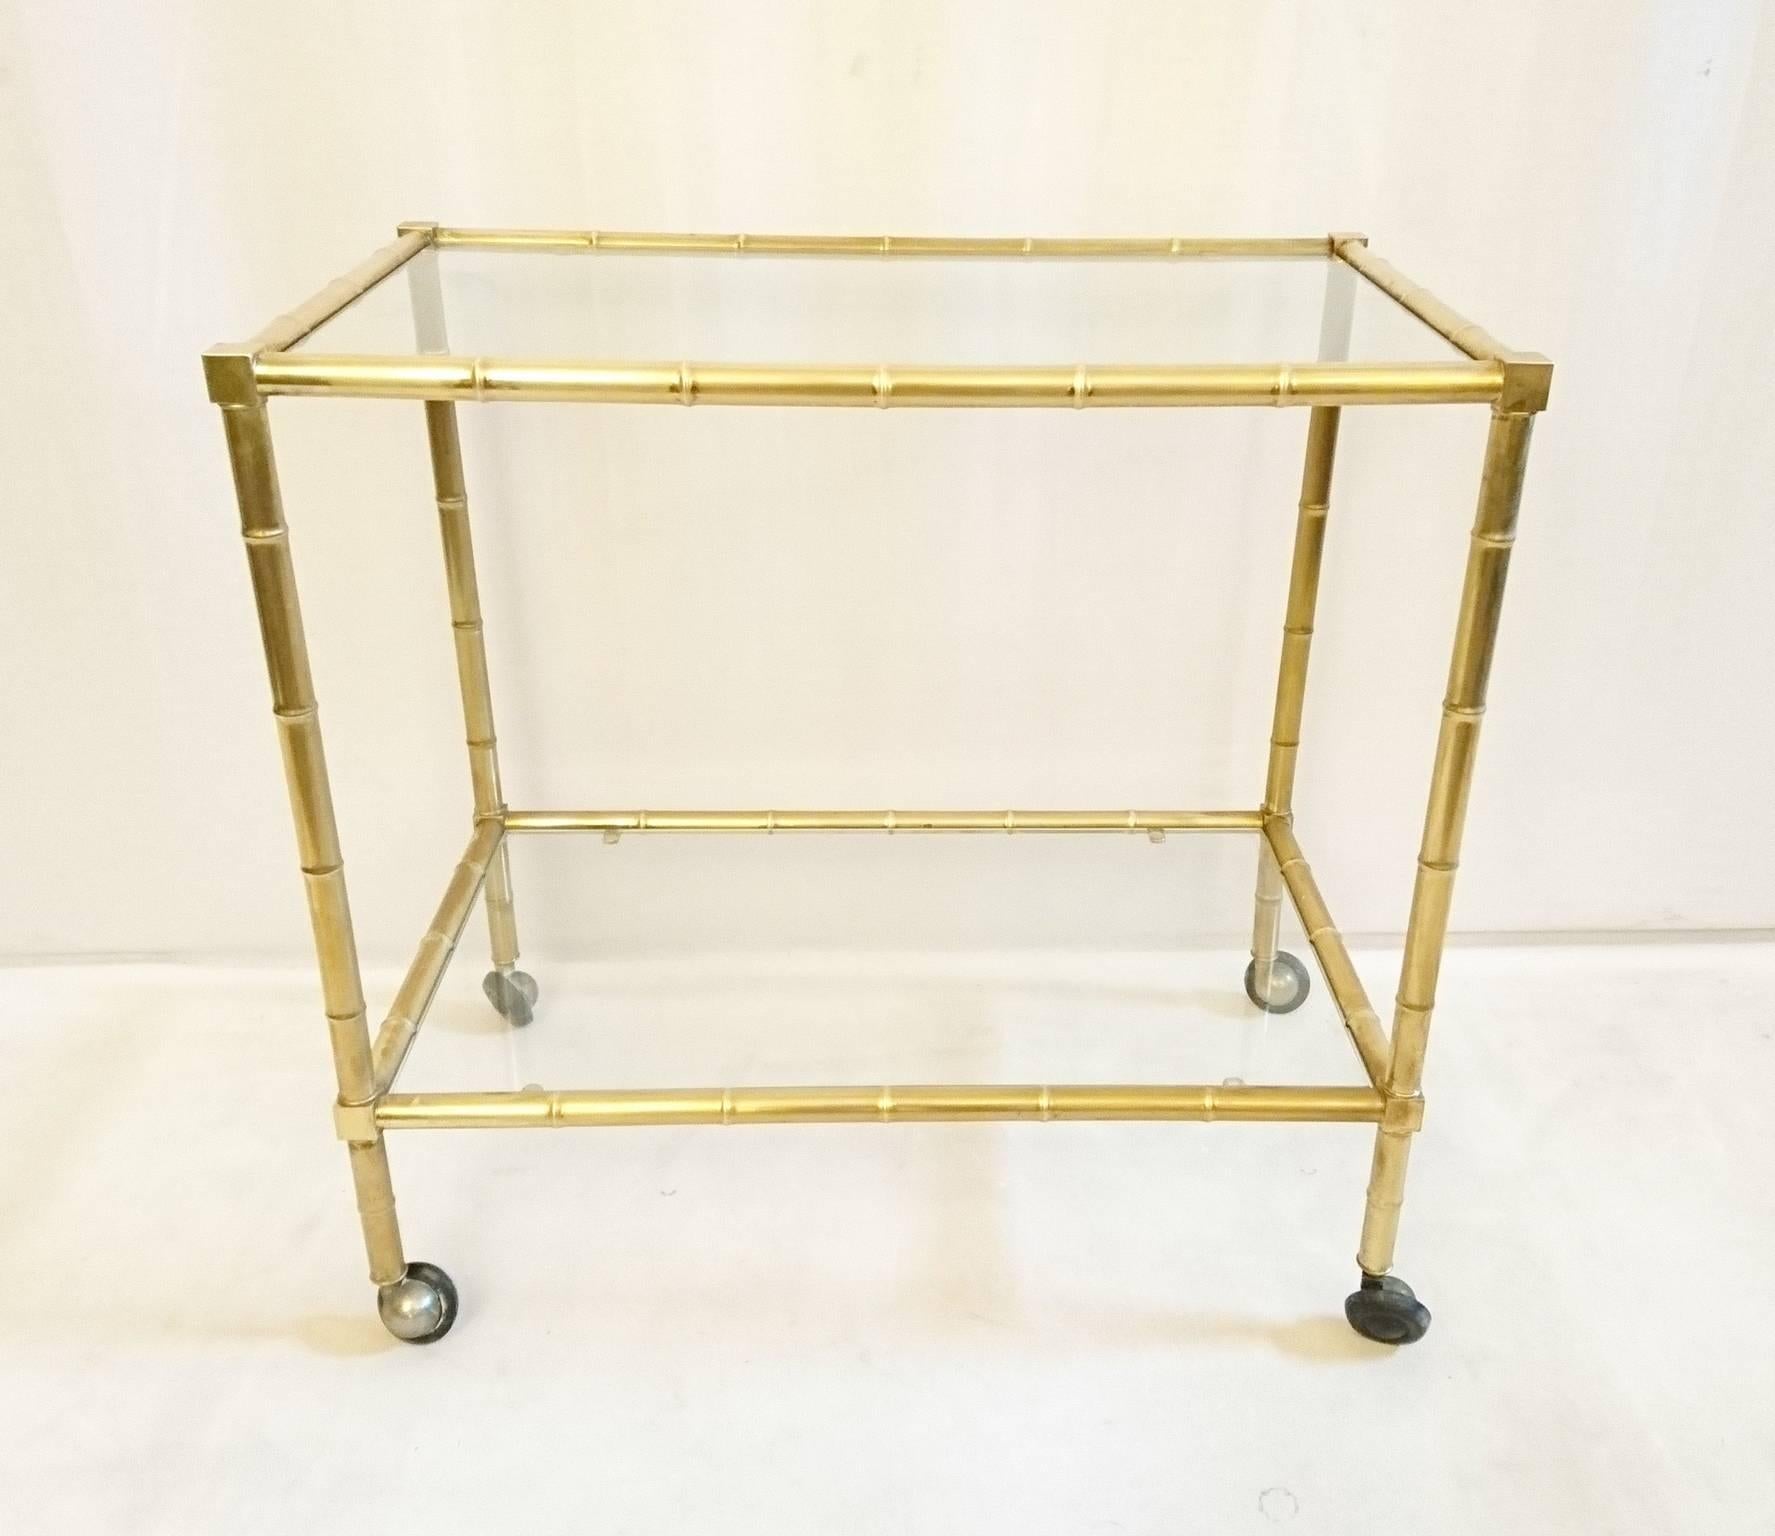 Two-tier bar cart in brass made to look like bamboo. Clear glass and original well working wheels.